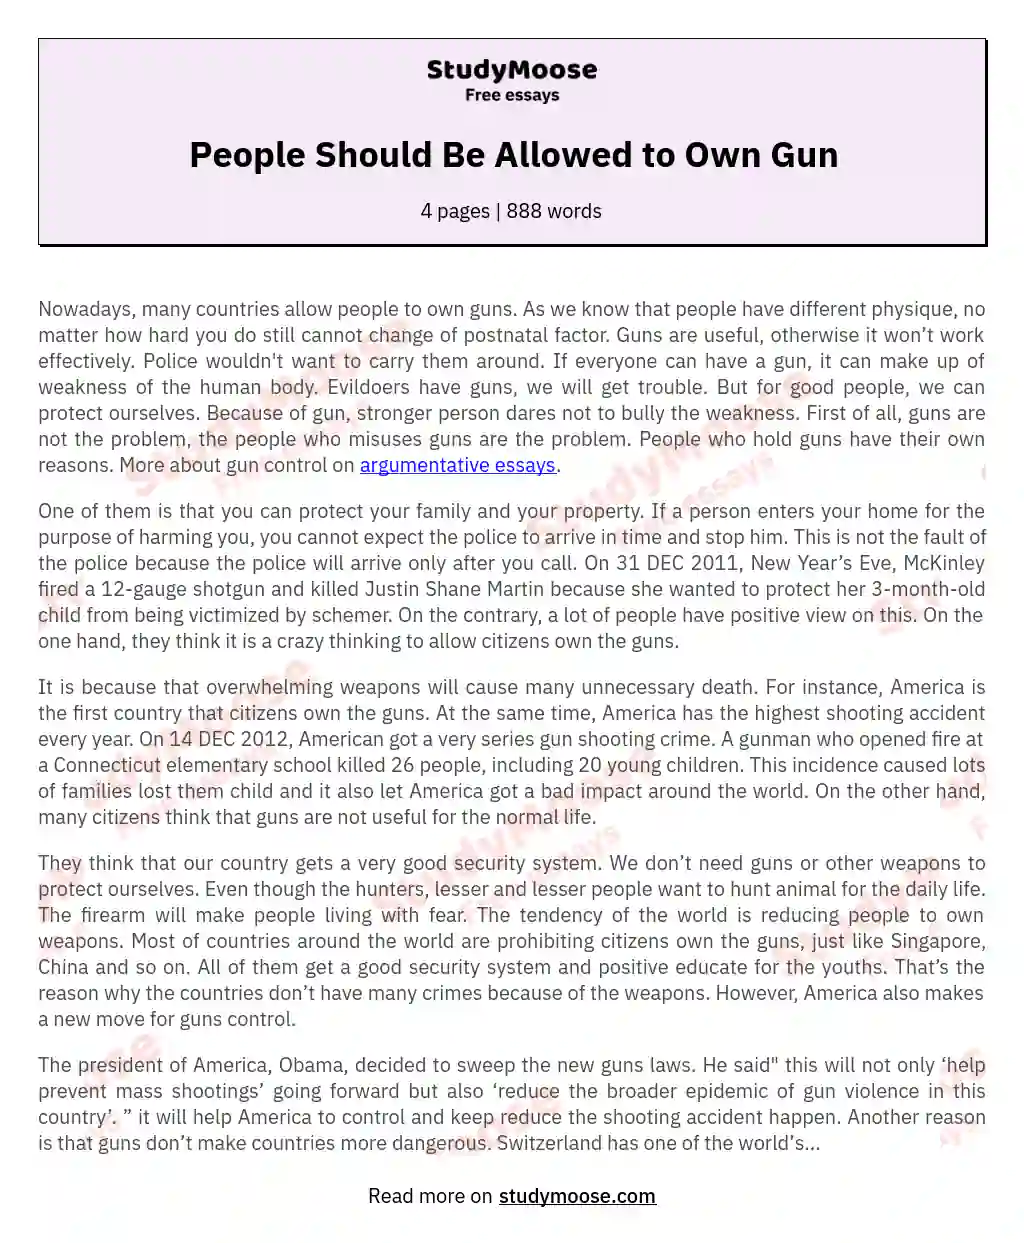 People Should Be Allowed to Own Gun essay